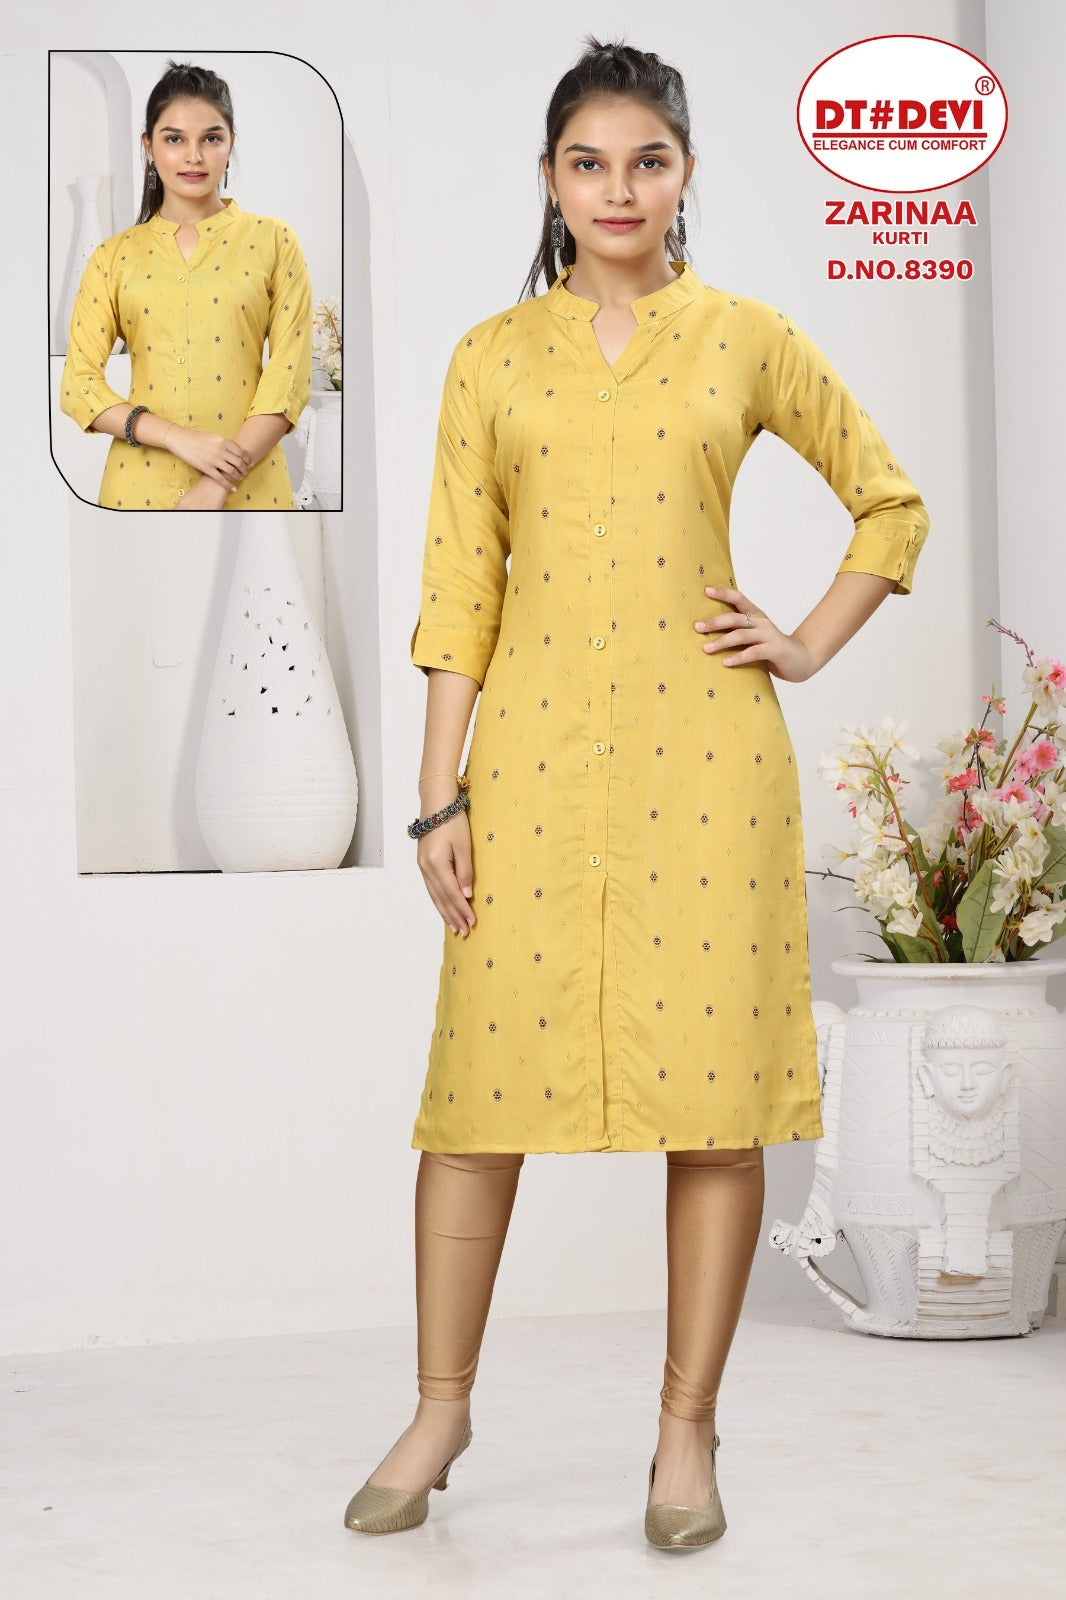 Buy AariKaari - Rayon Kurti for Women | Relaxed Fit | A Line | Ethnic Wear  | for Women & Girls | Collared Neck|Sleeveless| (Medium, Blue) at Amazon.in